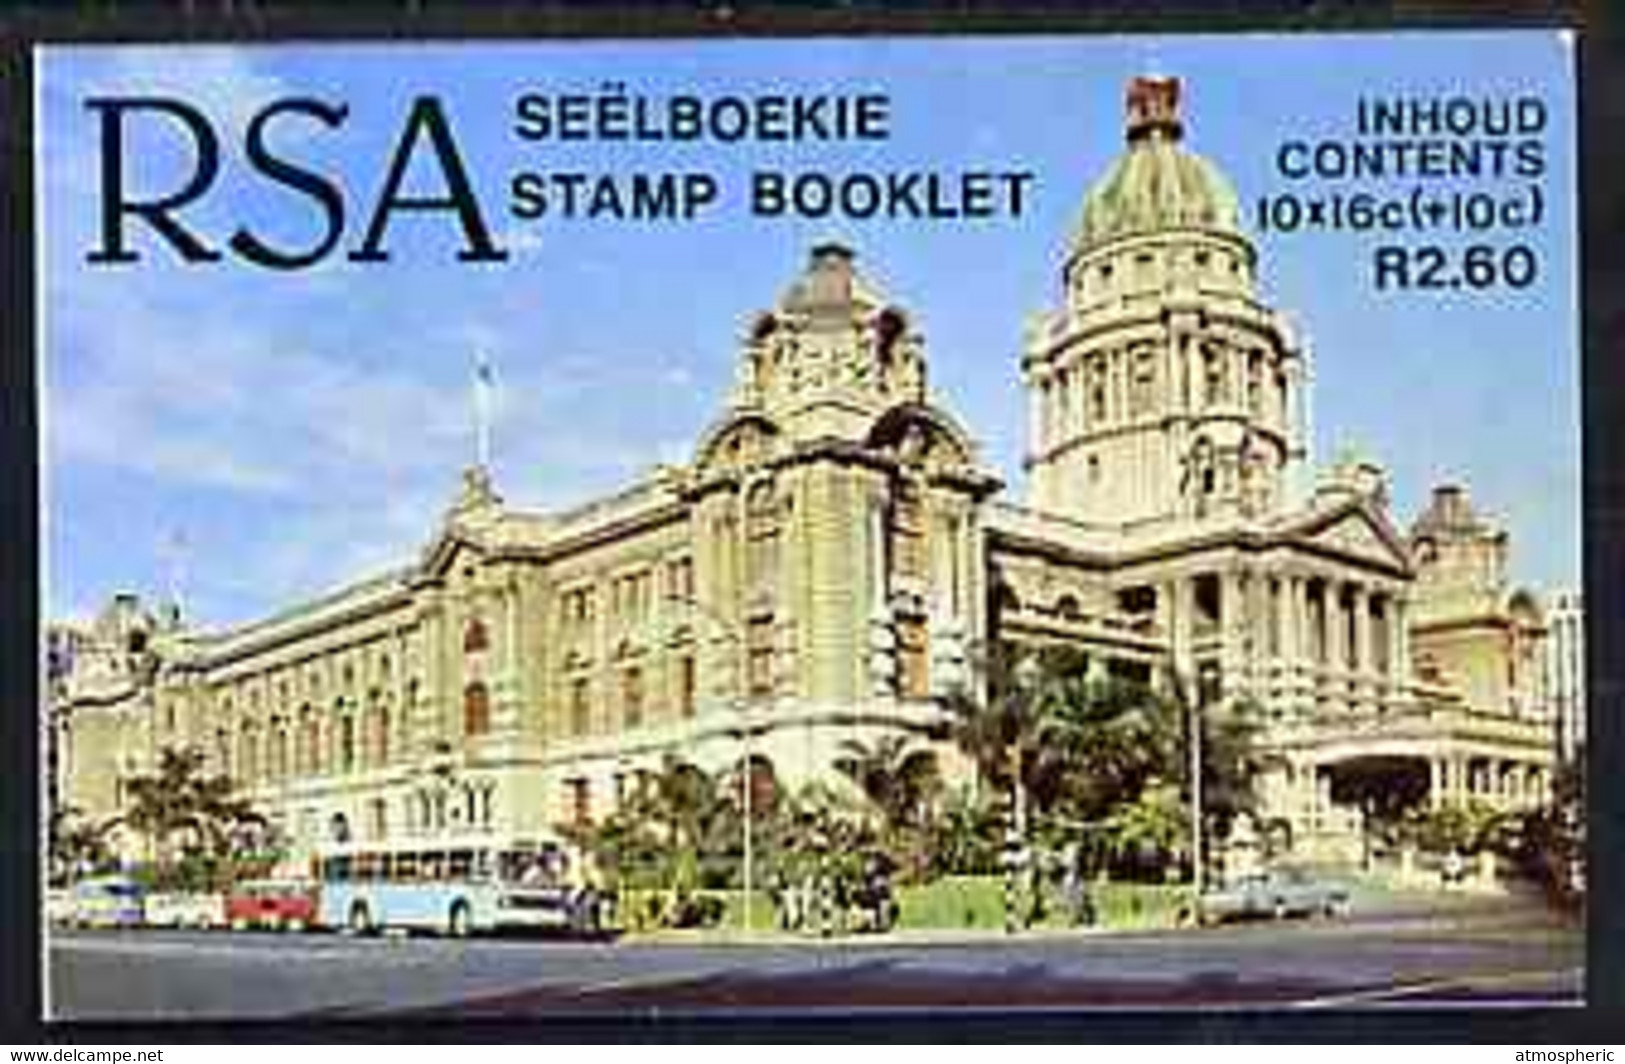 Booklet - South Africa 1987-88 National Flood Relief Fund #1 (City Hall) 2r60 Booklet Complete And Pristine, SG SB20 - Booklets